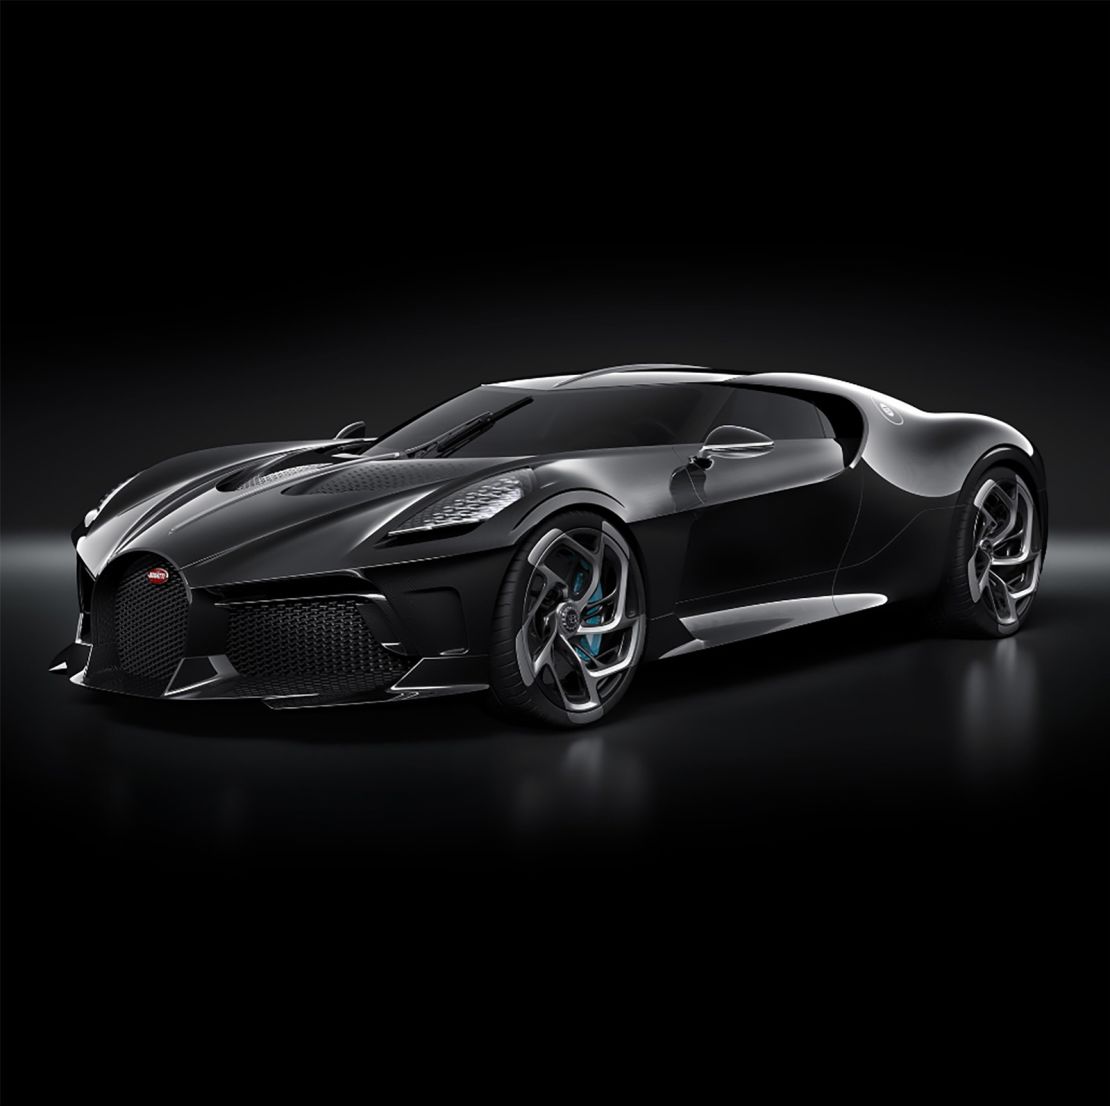 La Voiture Noire has the same 16-cylinder engine as the $3 million Chiron on which it is based. 